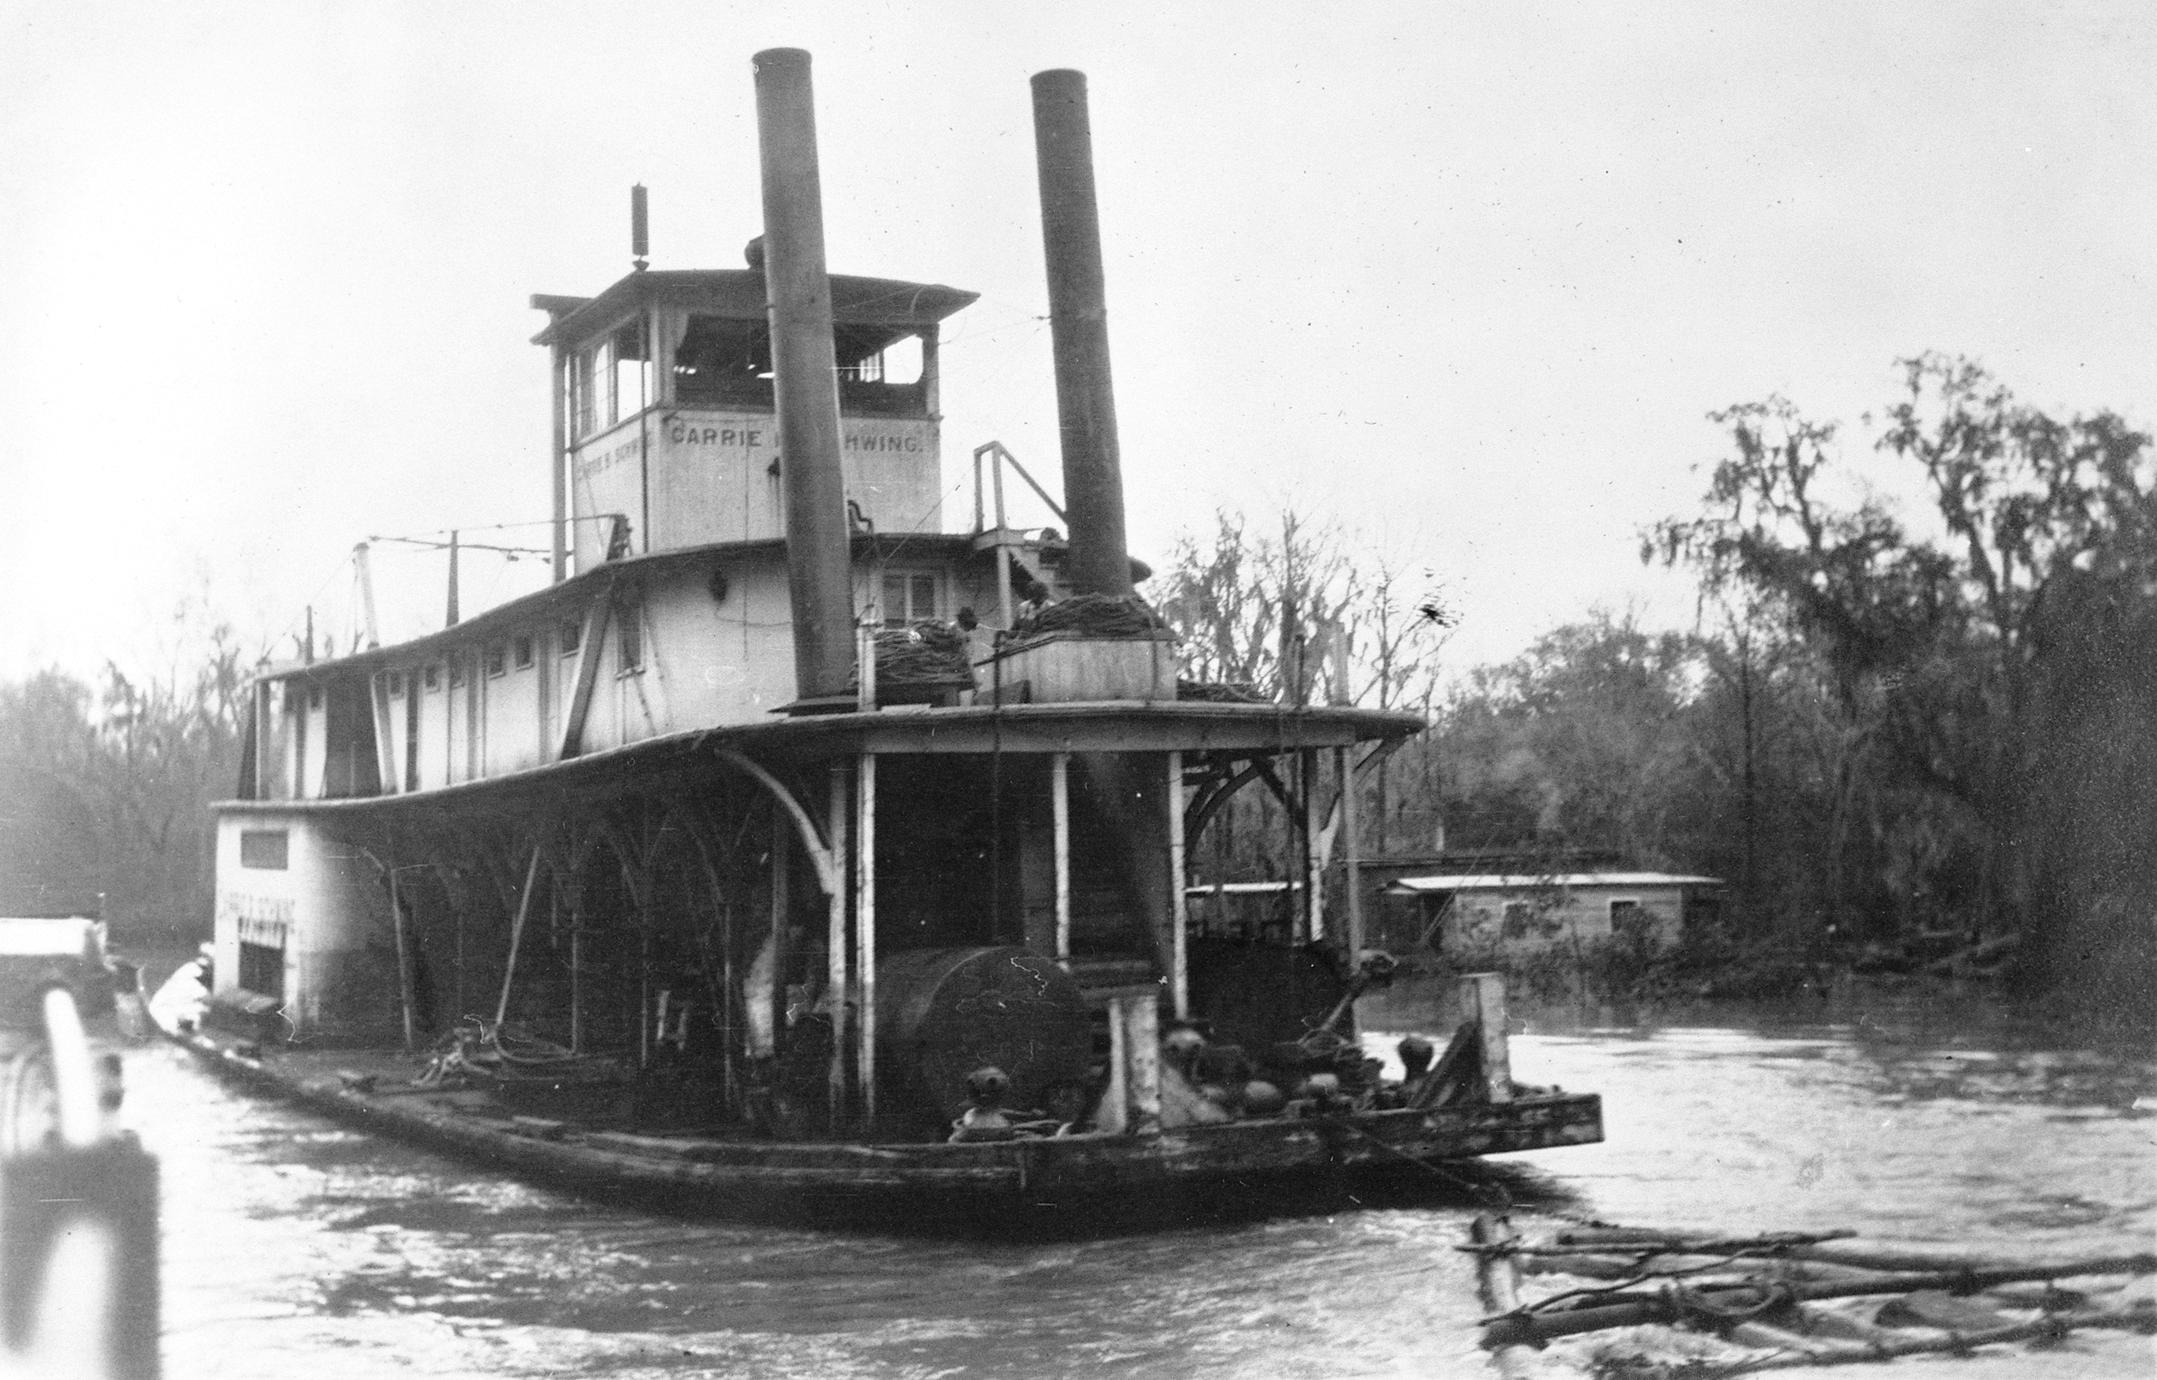 Carrie B. Schwing (Packet/Towboat, 1912-1946)